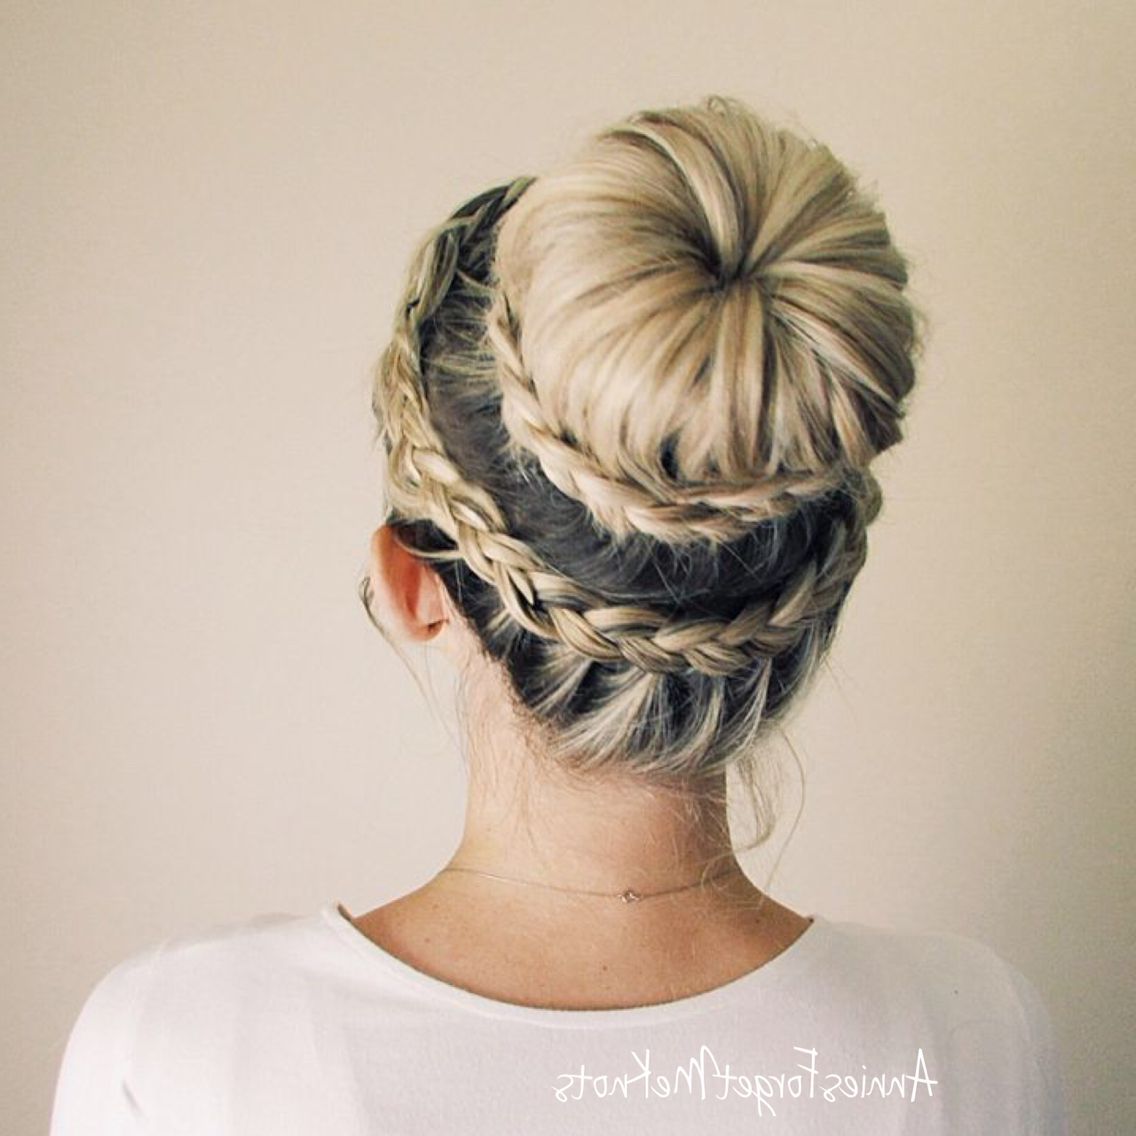 Most Up To Date Braided Ballerina Bun Hairstyles With Regard To How To: Lace Dutch Crown Braid + Lace Dutch Braided Bun (View 19 of 20)